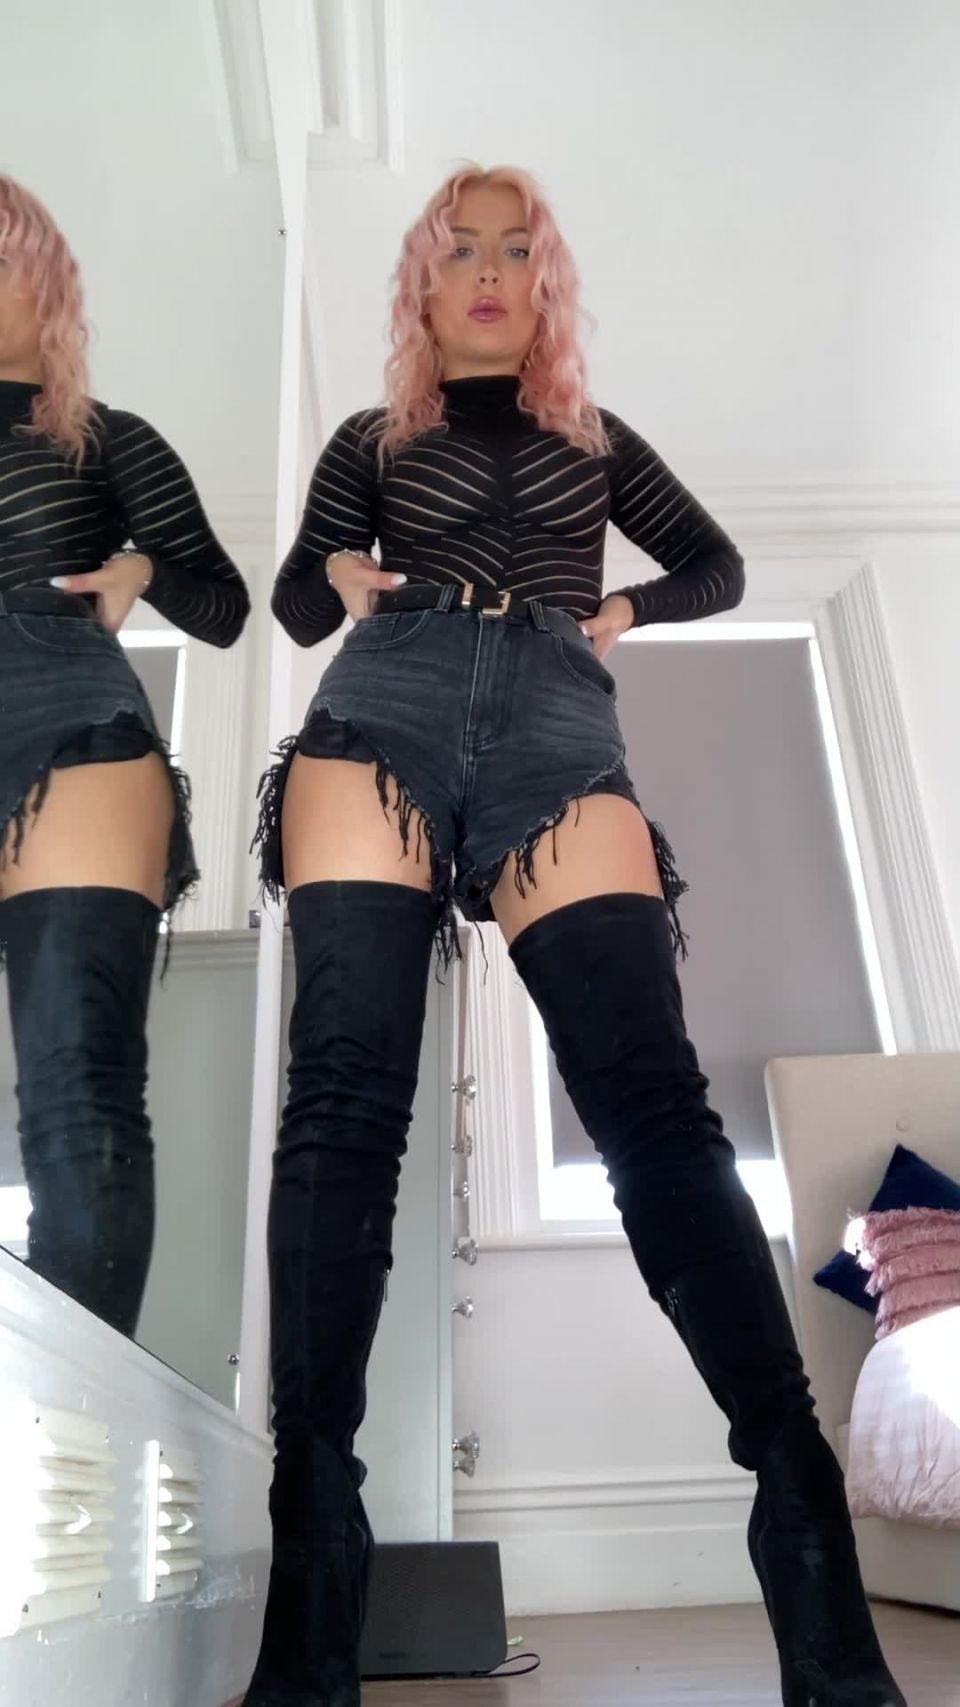 M@nyV1ds - CutieDaisyMay093 - Thigh high boot worship